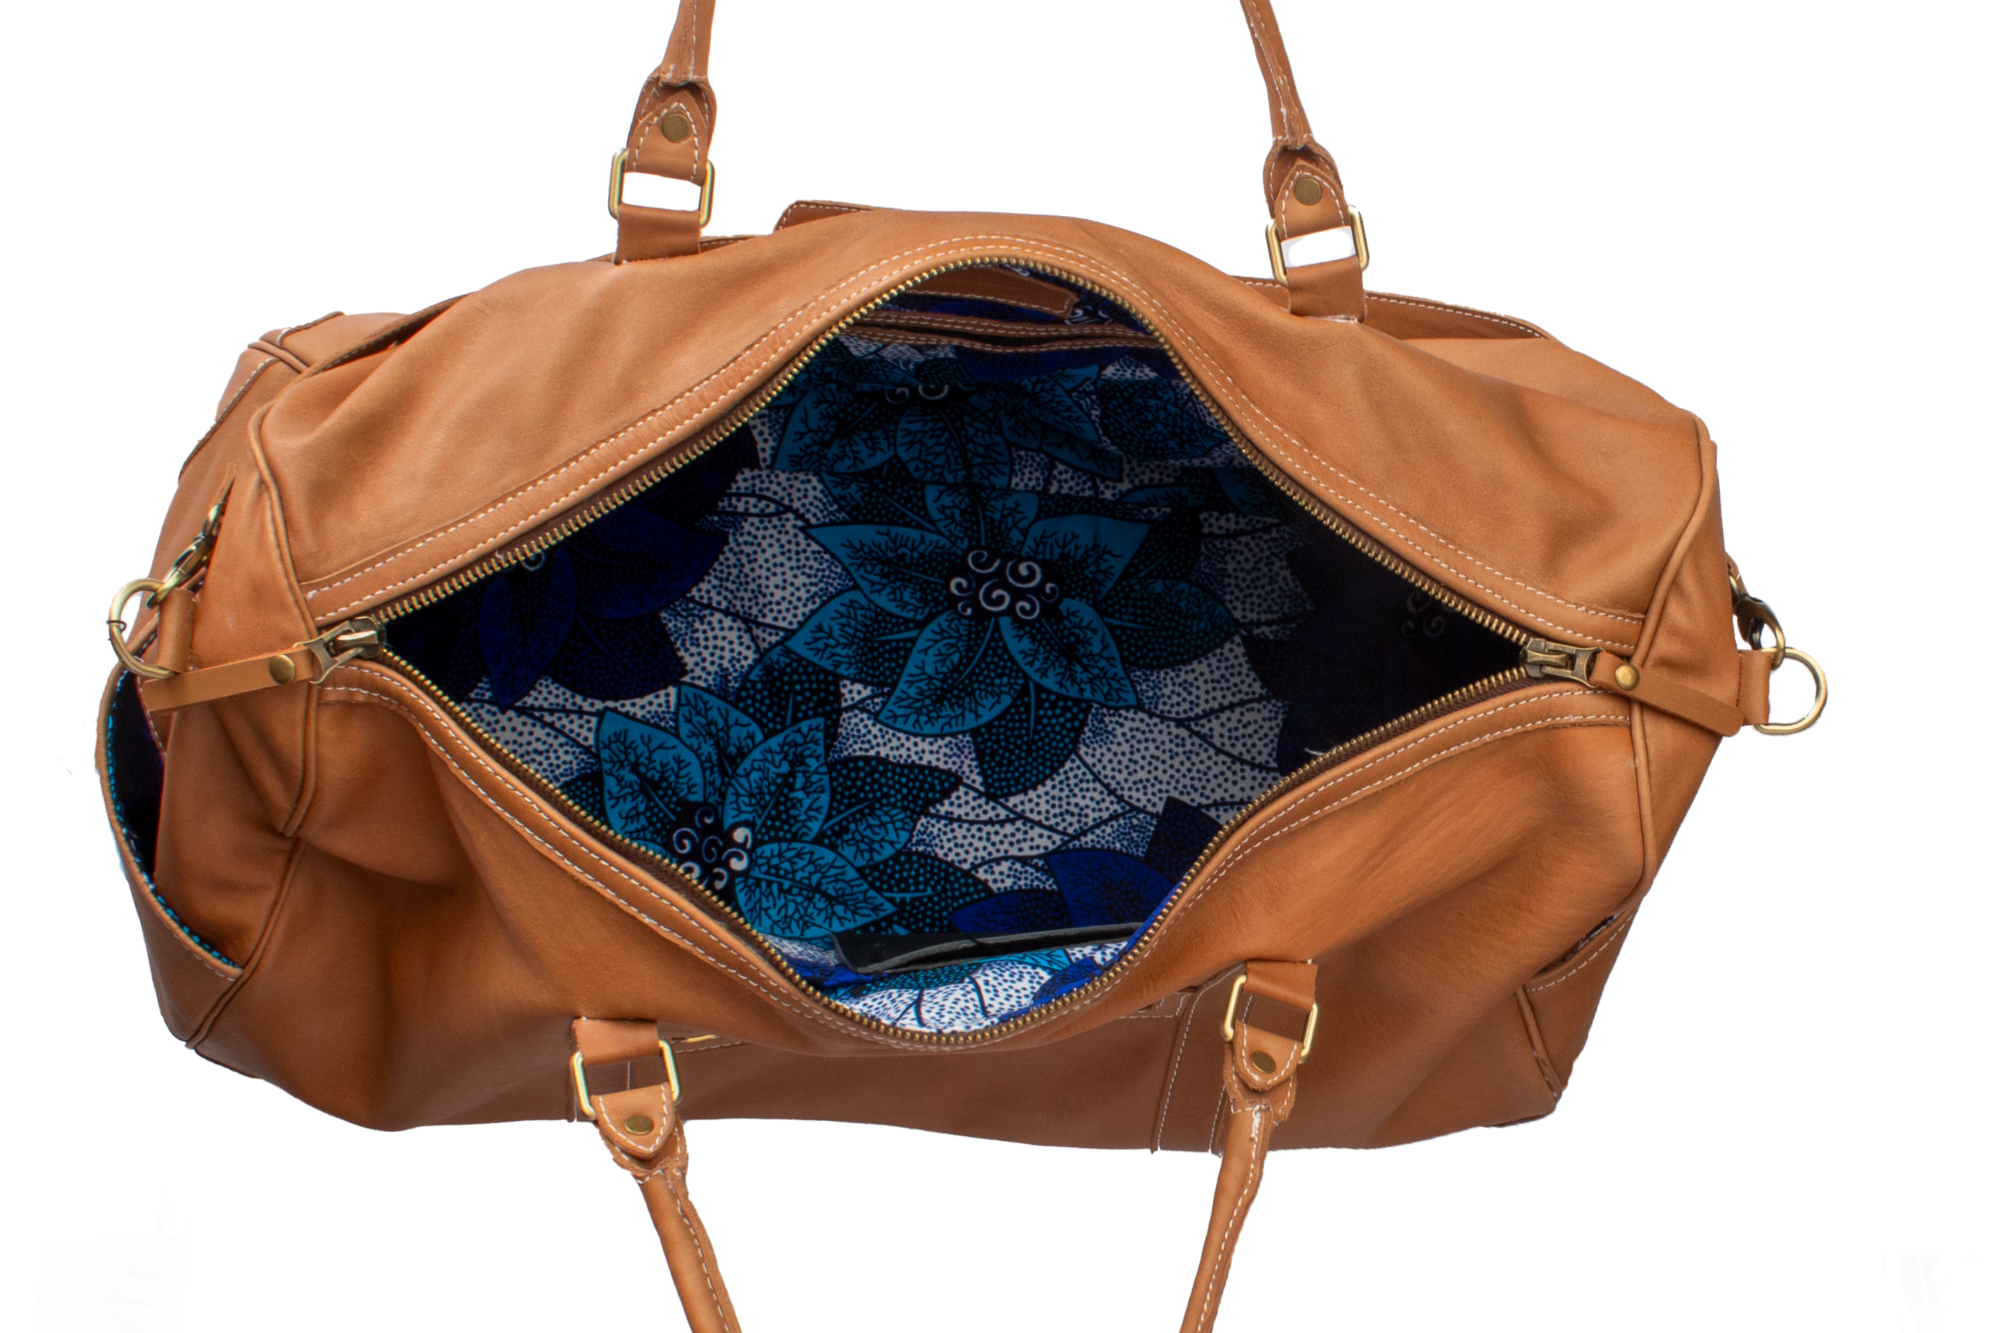 Ulendo Duffle Bag in Tan/Blue - Handcrafted Leather Travel Gear